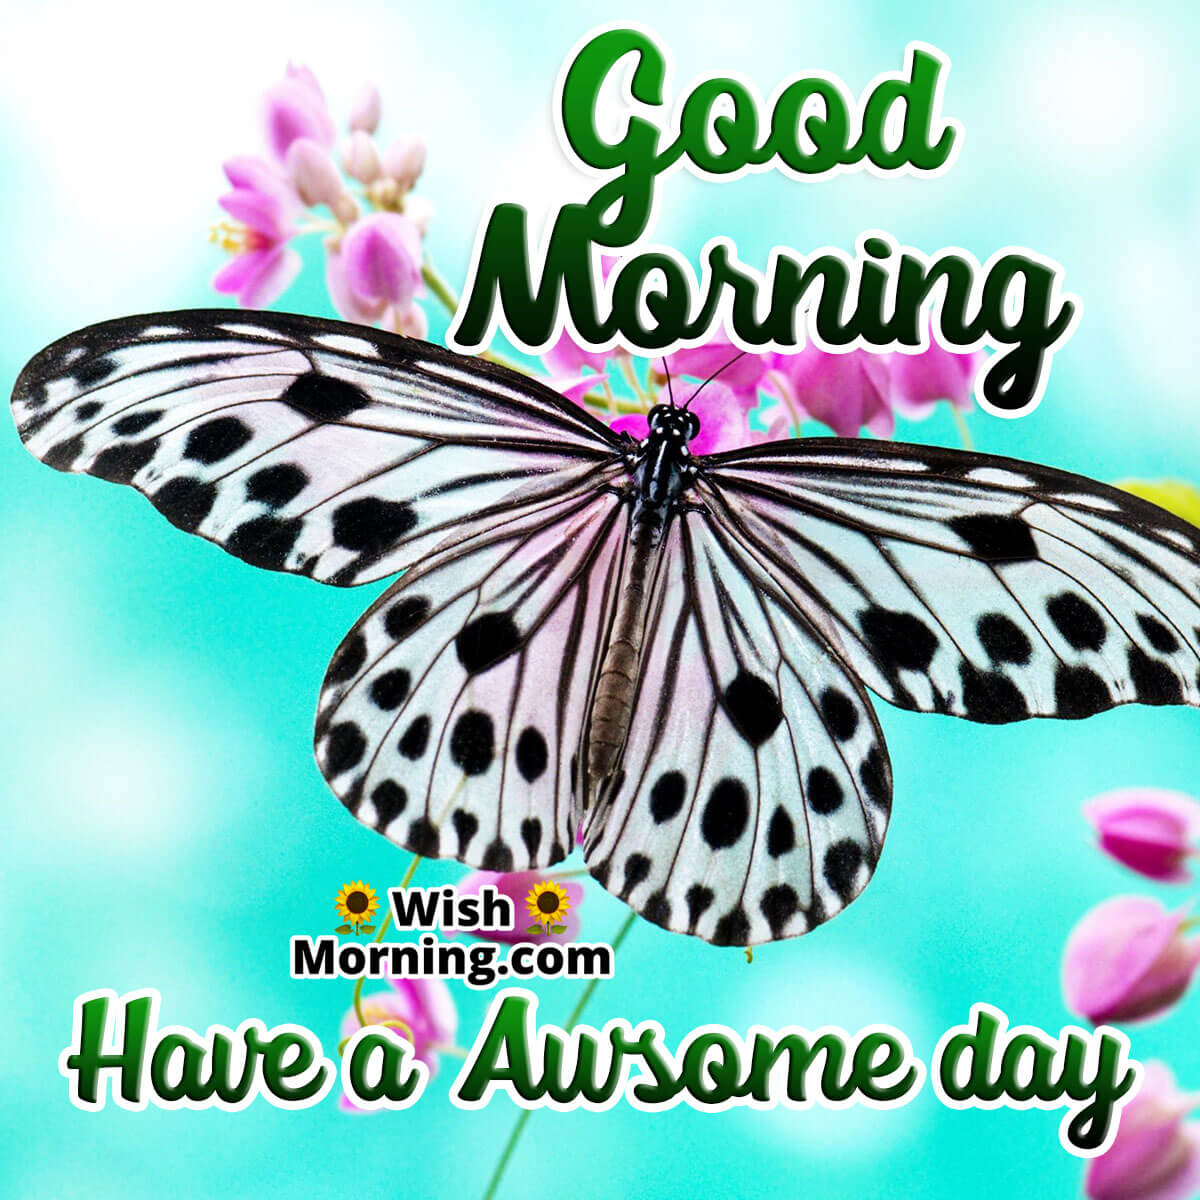 Good Morning Butterfly Images - Wish Morning